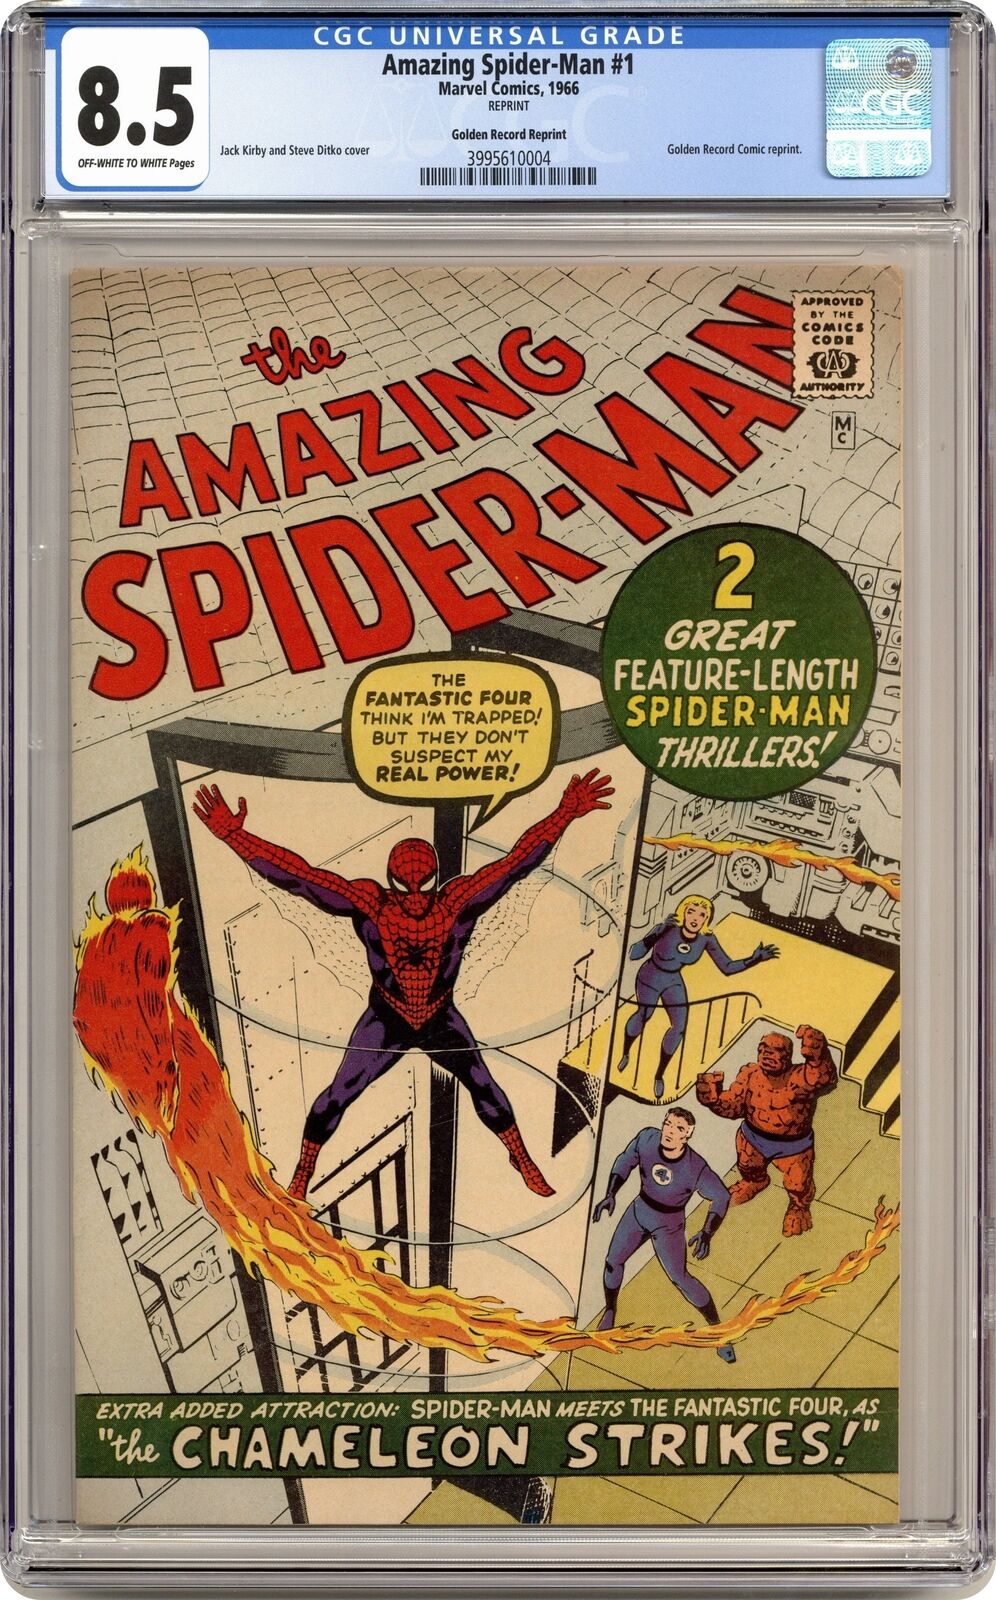 Amazing Spider-Man Golden Record Reprint #1 Comic Only CGC 8.5 1966 3995610004